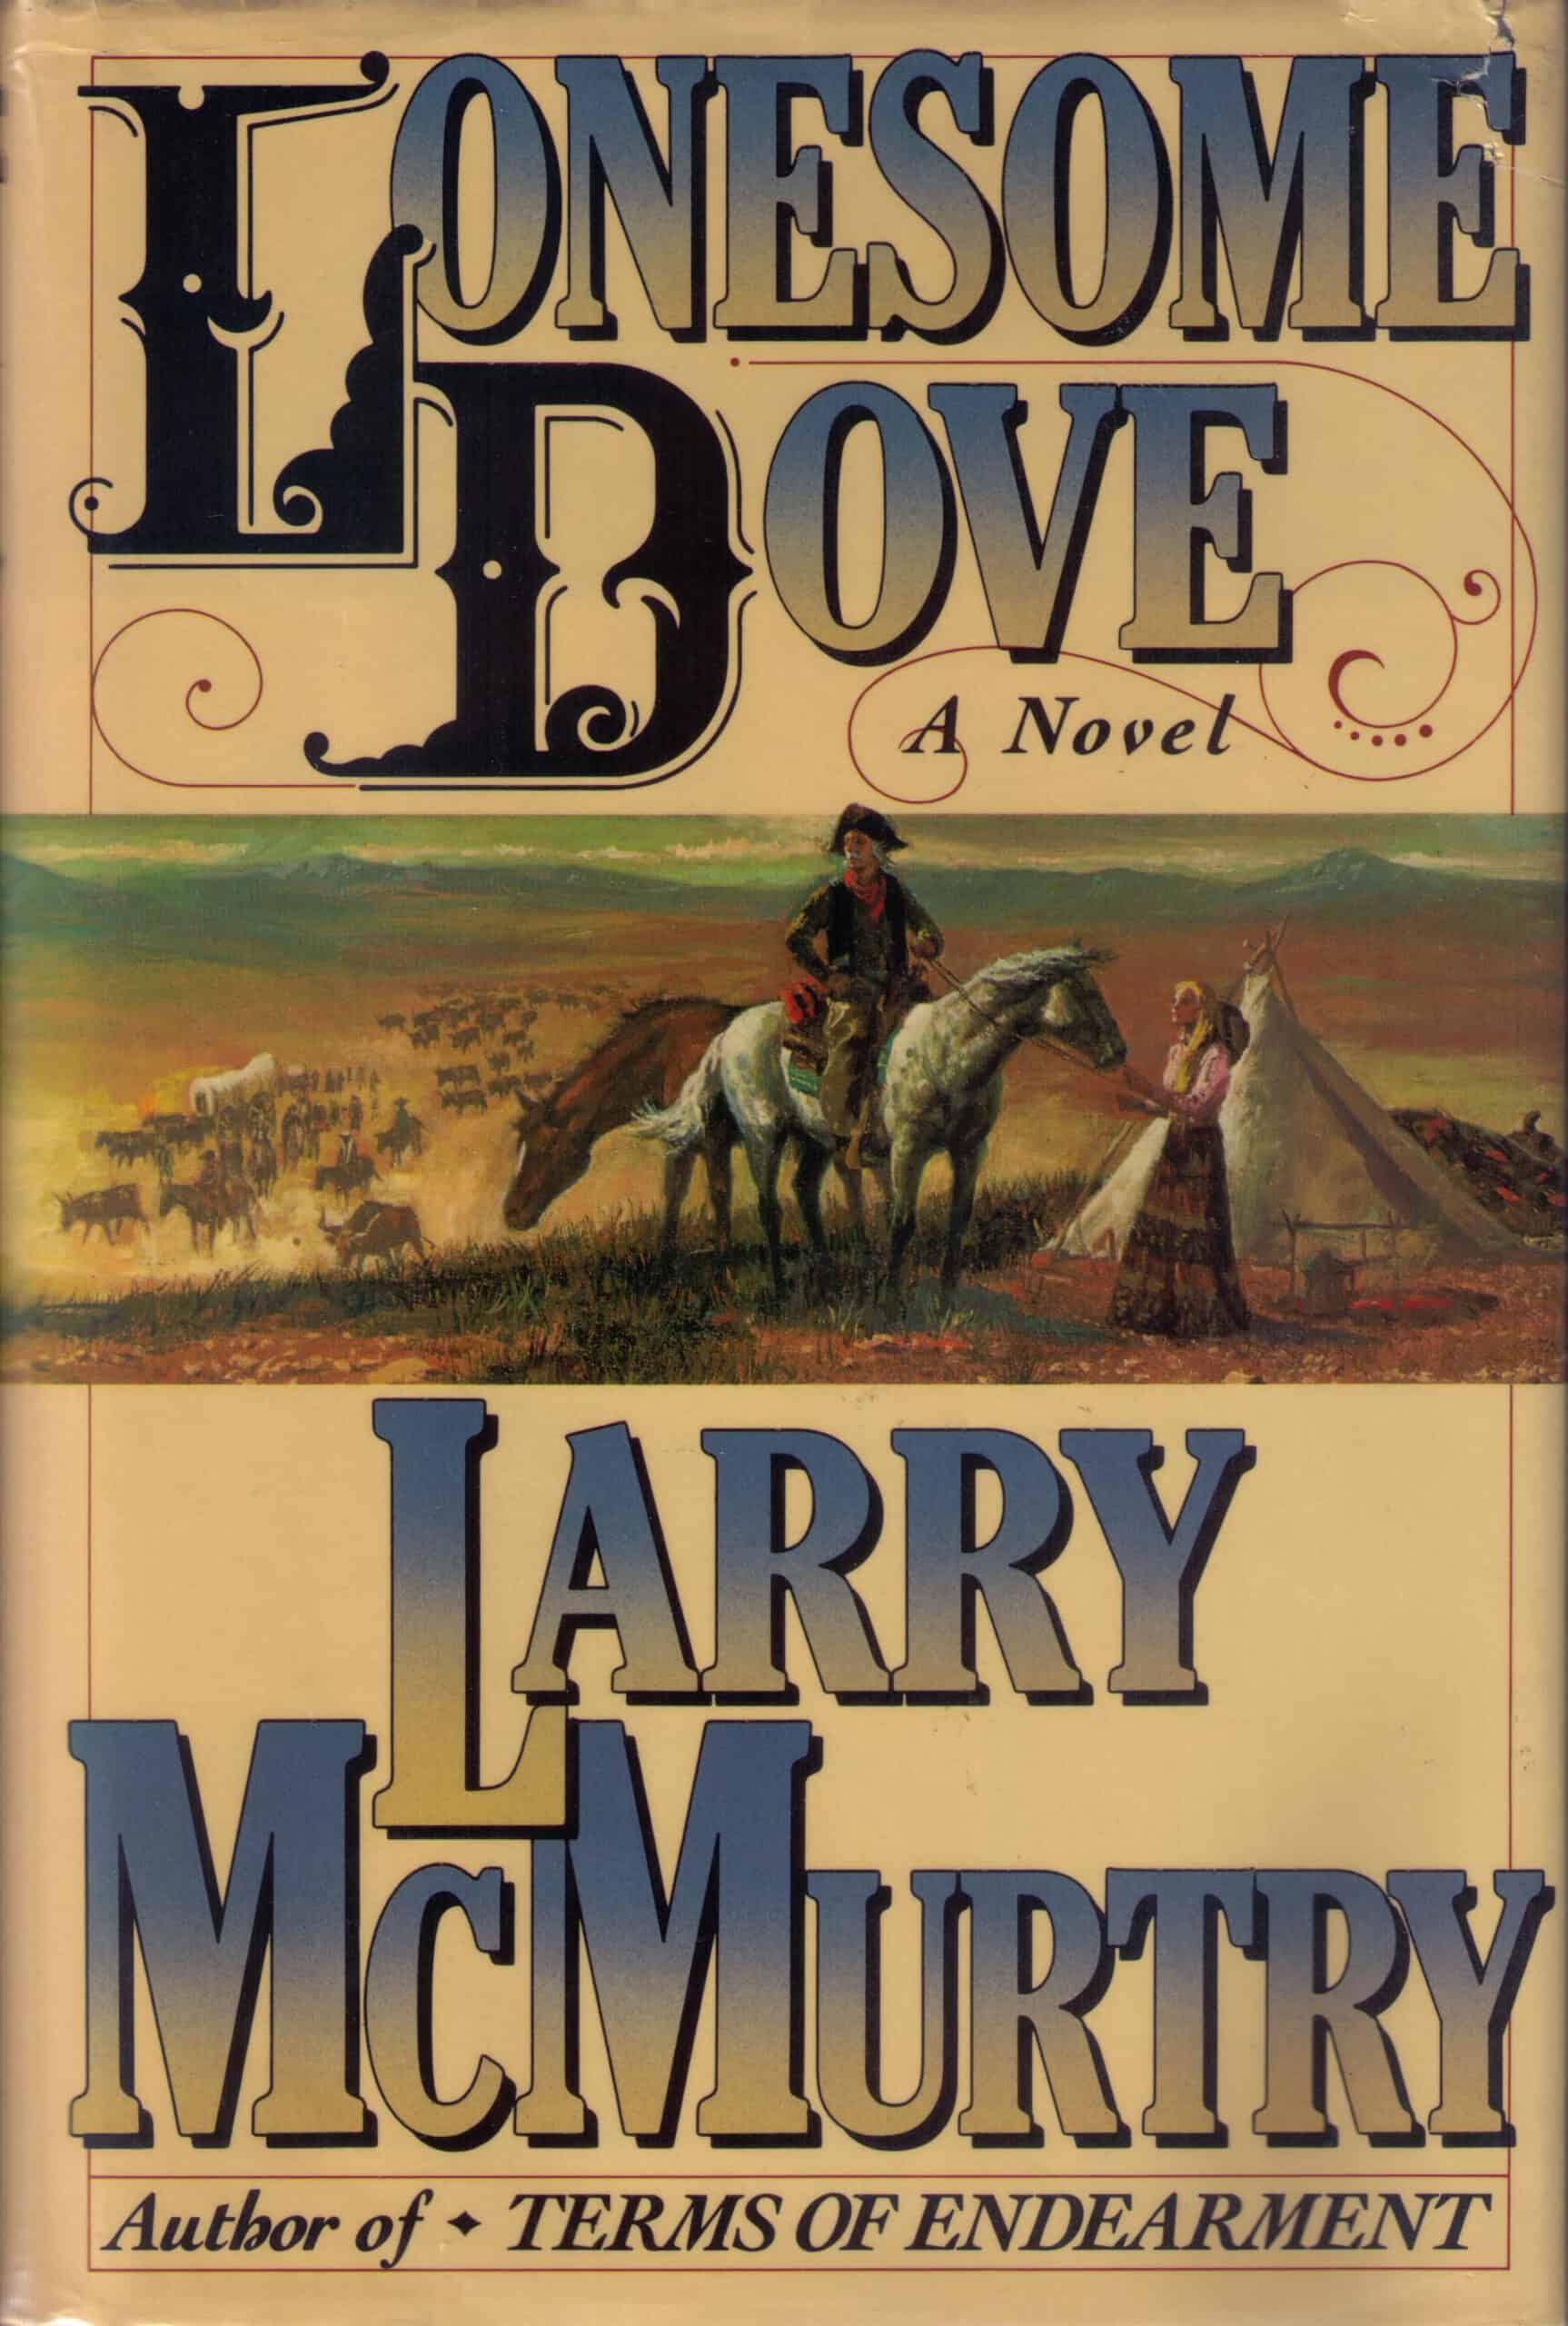 <ul> <li><strong>Runtime:</strong> 36 hours, 47 minutes</li>    <li><strong>Author:</strong> Larry McMurtry</li>    <li><strong>Narrator:</strong> Lee Horsley</li> </ul>    <p>Larry McMurtry's <i>Lonesome Dove</i> remains one of the most exceptional Western novels ever written. Thanks to Lee Horsley's narration on the audiobook, McMurtry's words take on all new weight. This masterpiece tells the story of a cattle drive from Texas to Montana. When read aloud, everything feels that much more real. From its richly drawn characters to its vivid depiction of the American West to its exploration of friendship, loyalty, and the harsh realities of frontier life, <i>Lonesome Dove</i> is an absolute must-listen.</p>